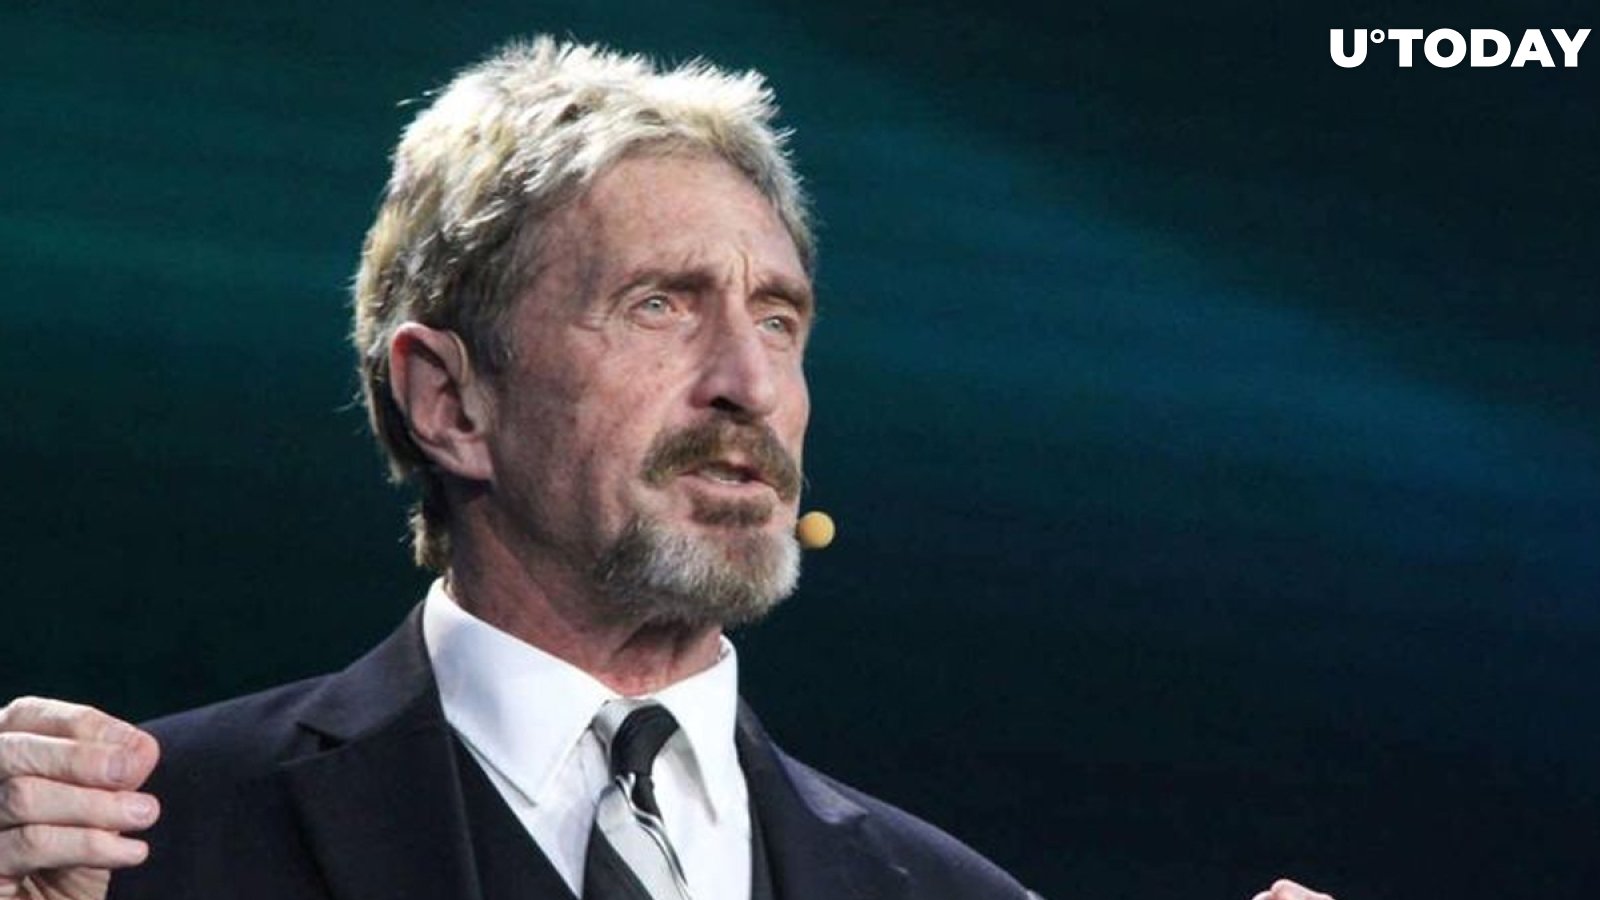 John McAfee: “SEC Allegations Against Me Are Overblown”, He Explains Why